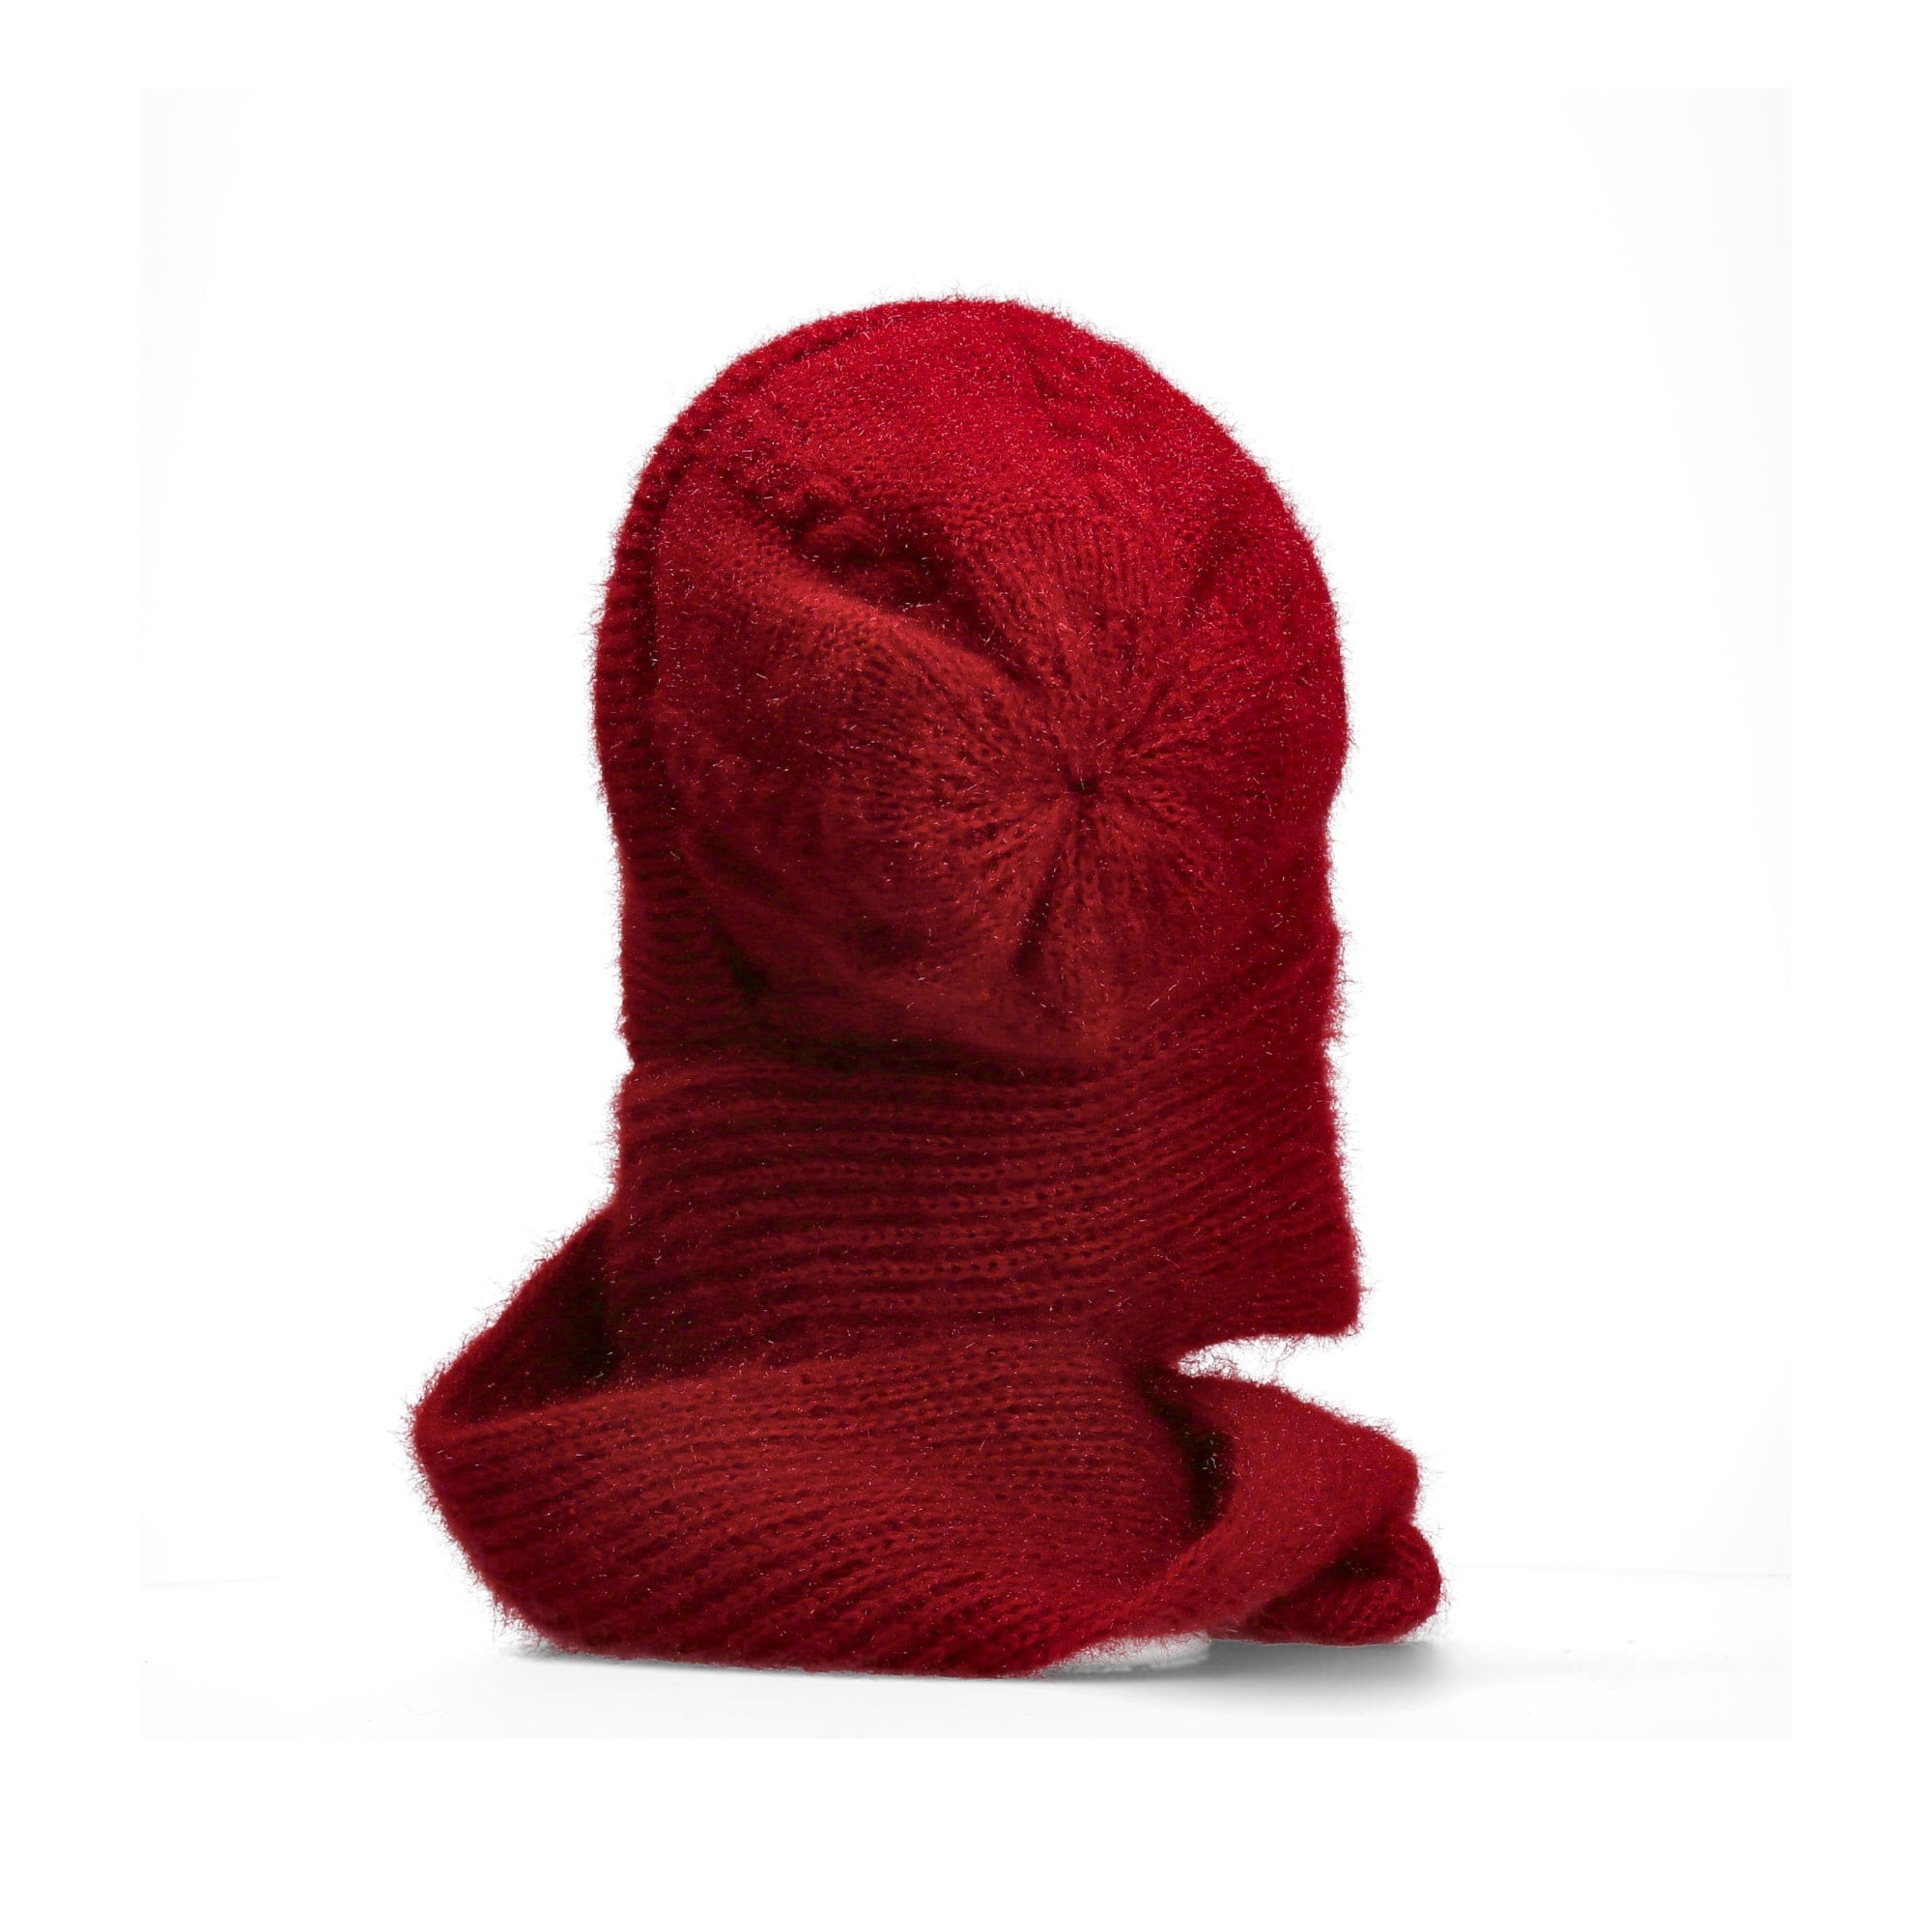 Exclusive hooded scarf - Hats